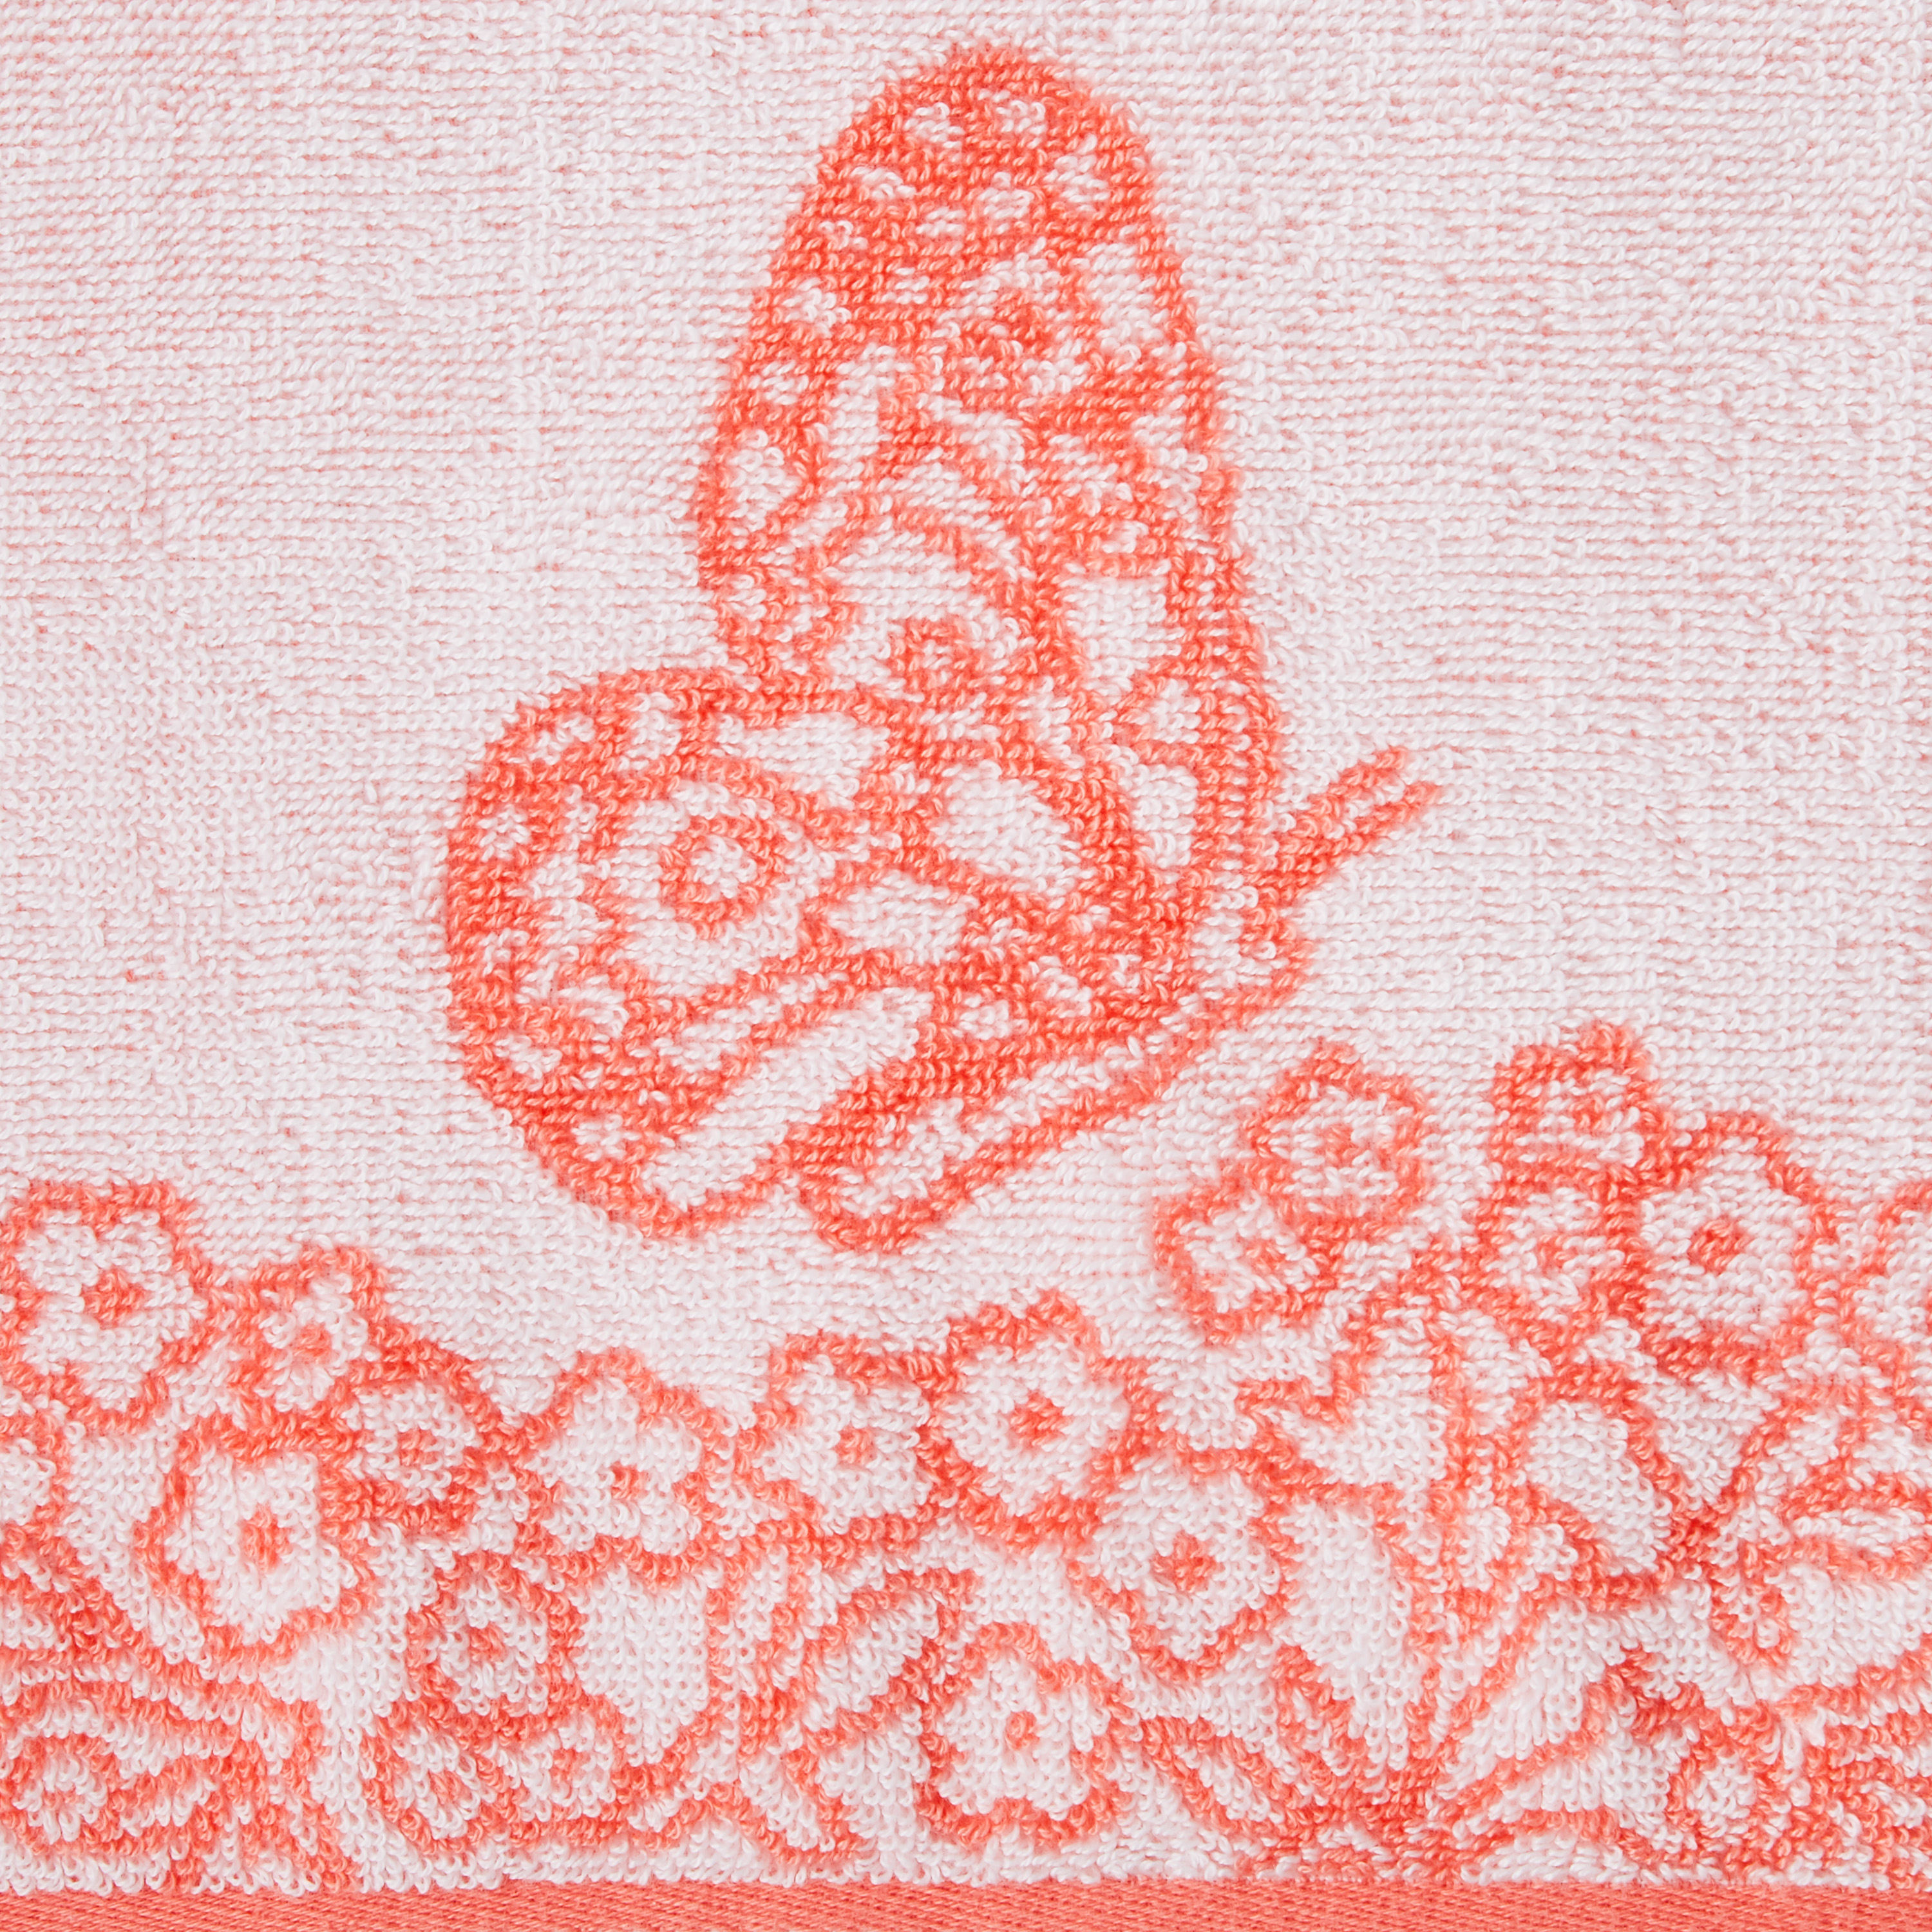 The Pioneer Woman Butterfly Garden 2-Pack Cotton Hand Towel Set, Coral Bell - image 5 of 5